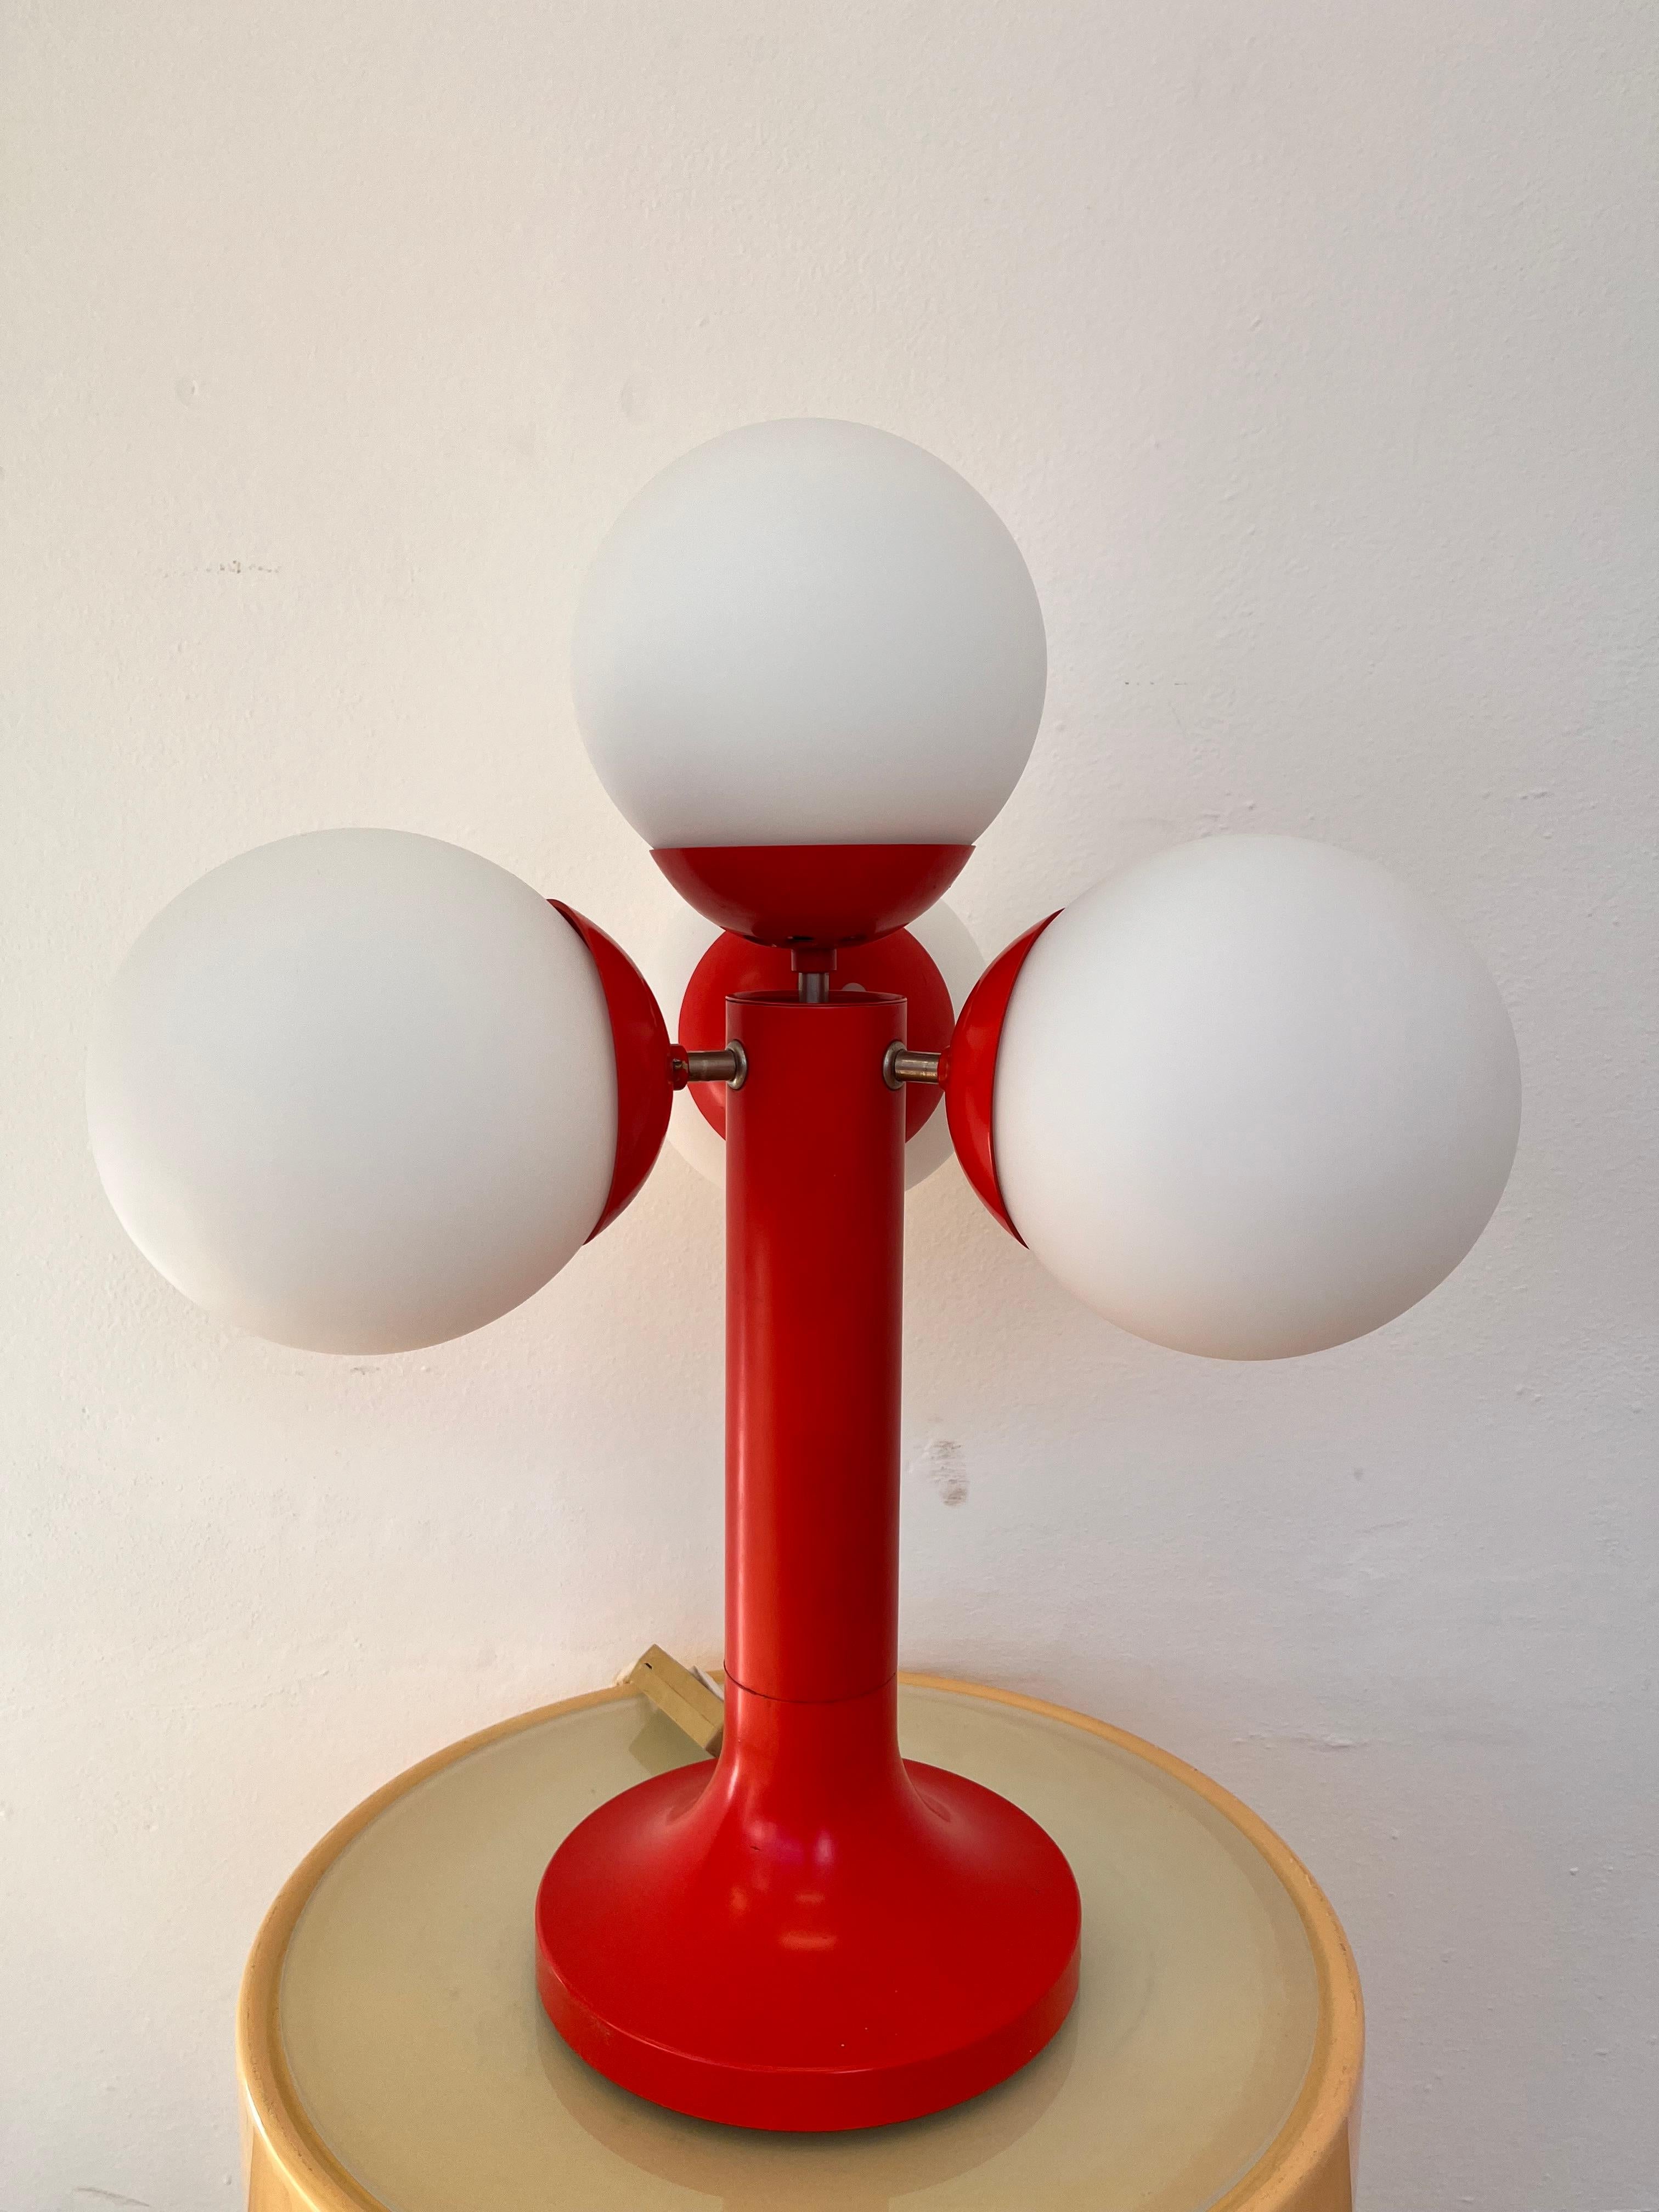 XL Midcentury Space Age Table Lamp, Sputnik or Atom, 1970s - Germany For Sale 2